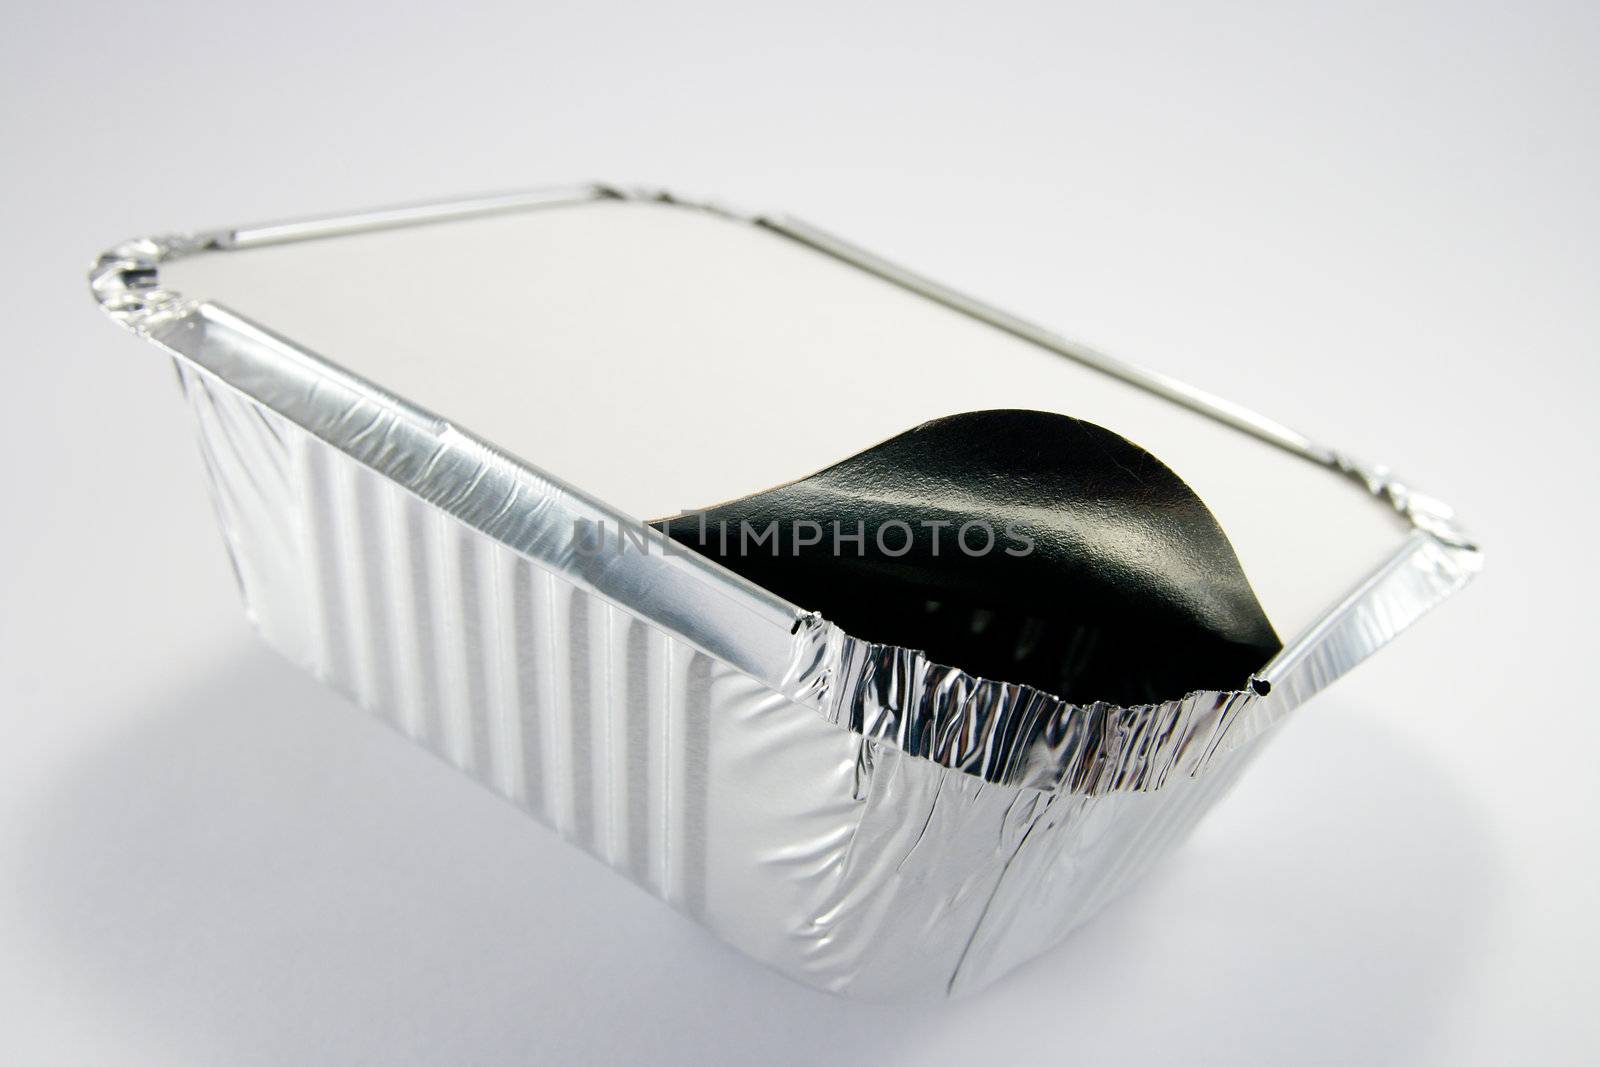 Square silver foil tray with lid slightly open on a white background